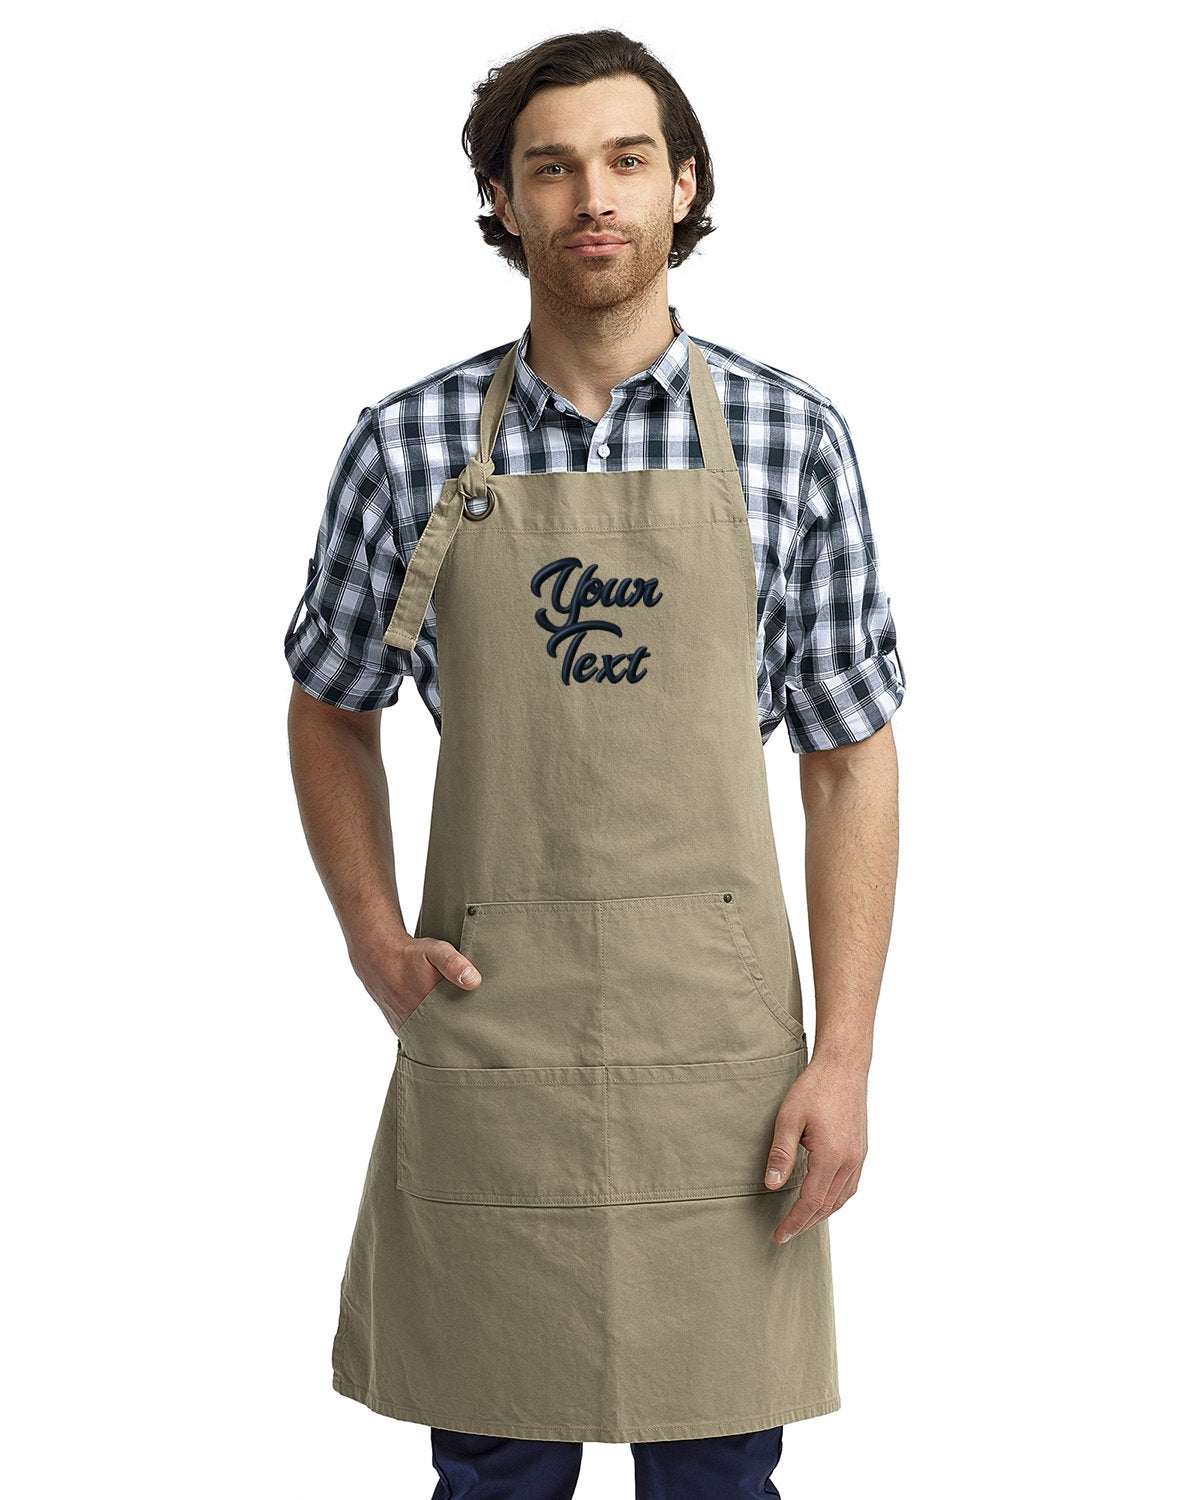 Unisex Pocket Apron Your Personalized Text Embroidered - 3 pack - khaki